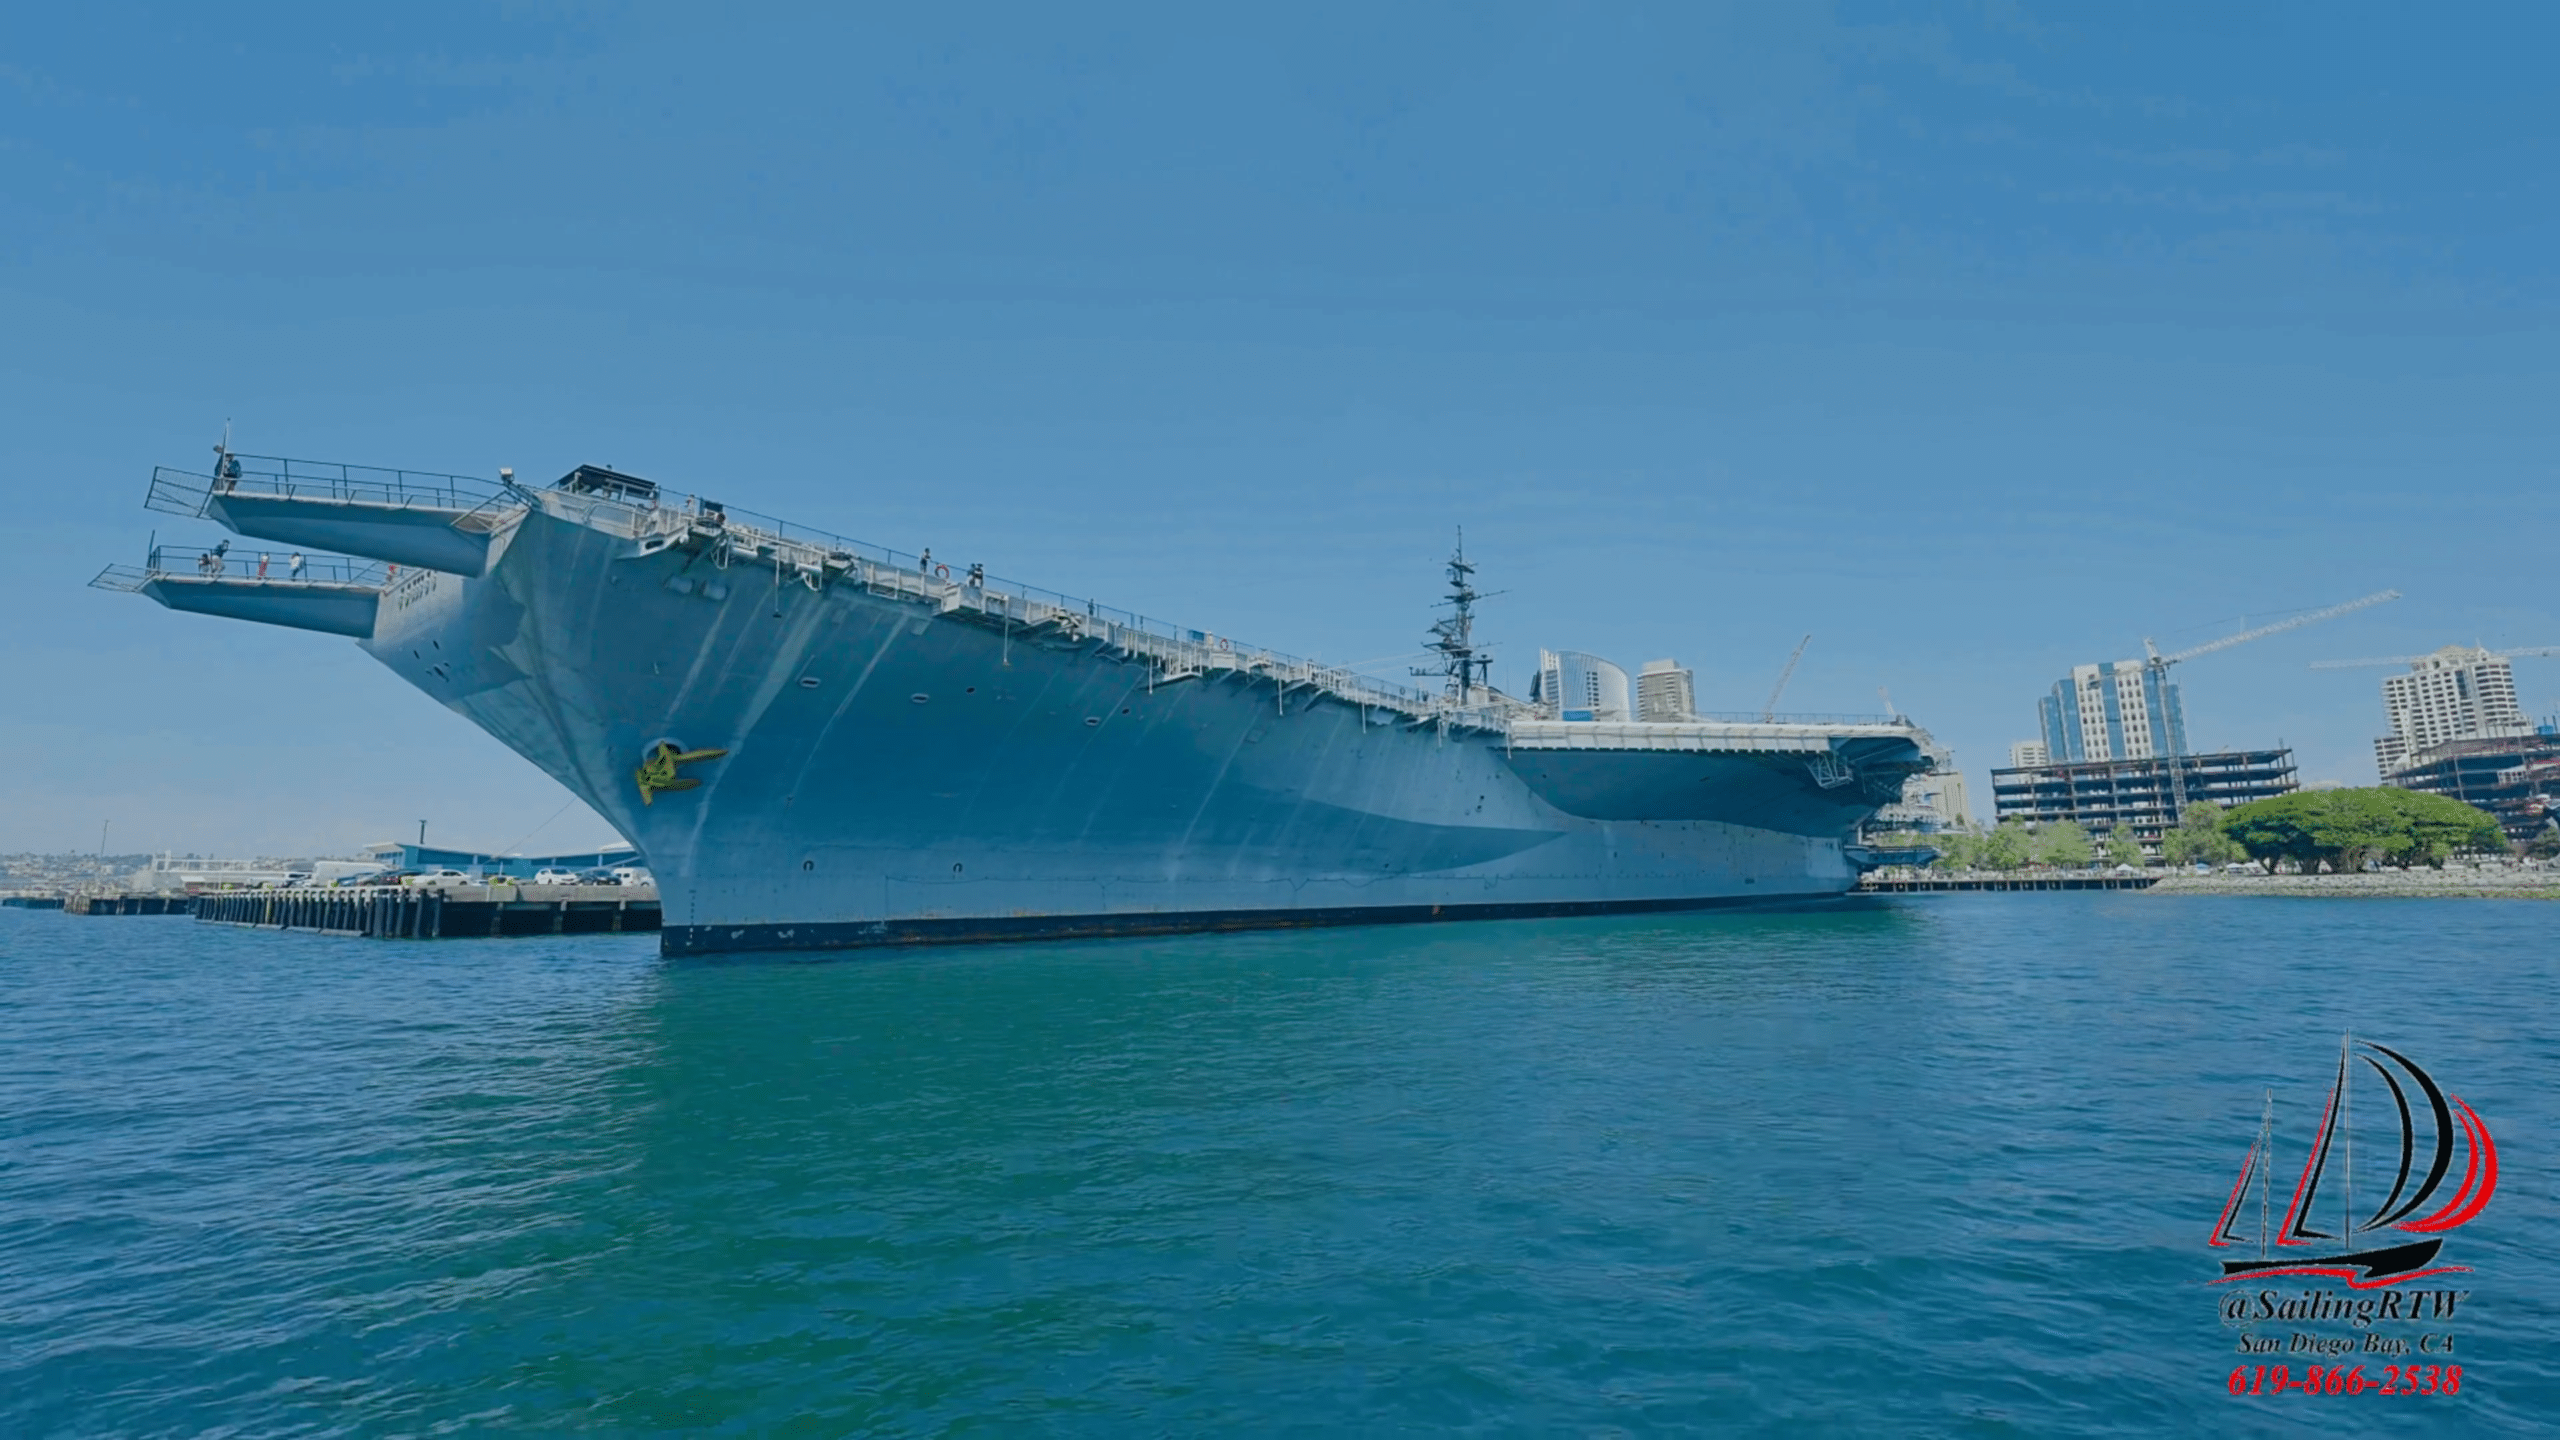 USS MIDWAY MUSEUM, one of many sites sailing on San Diego Bay